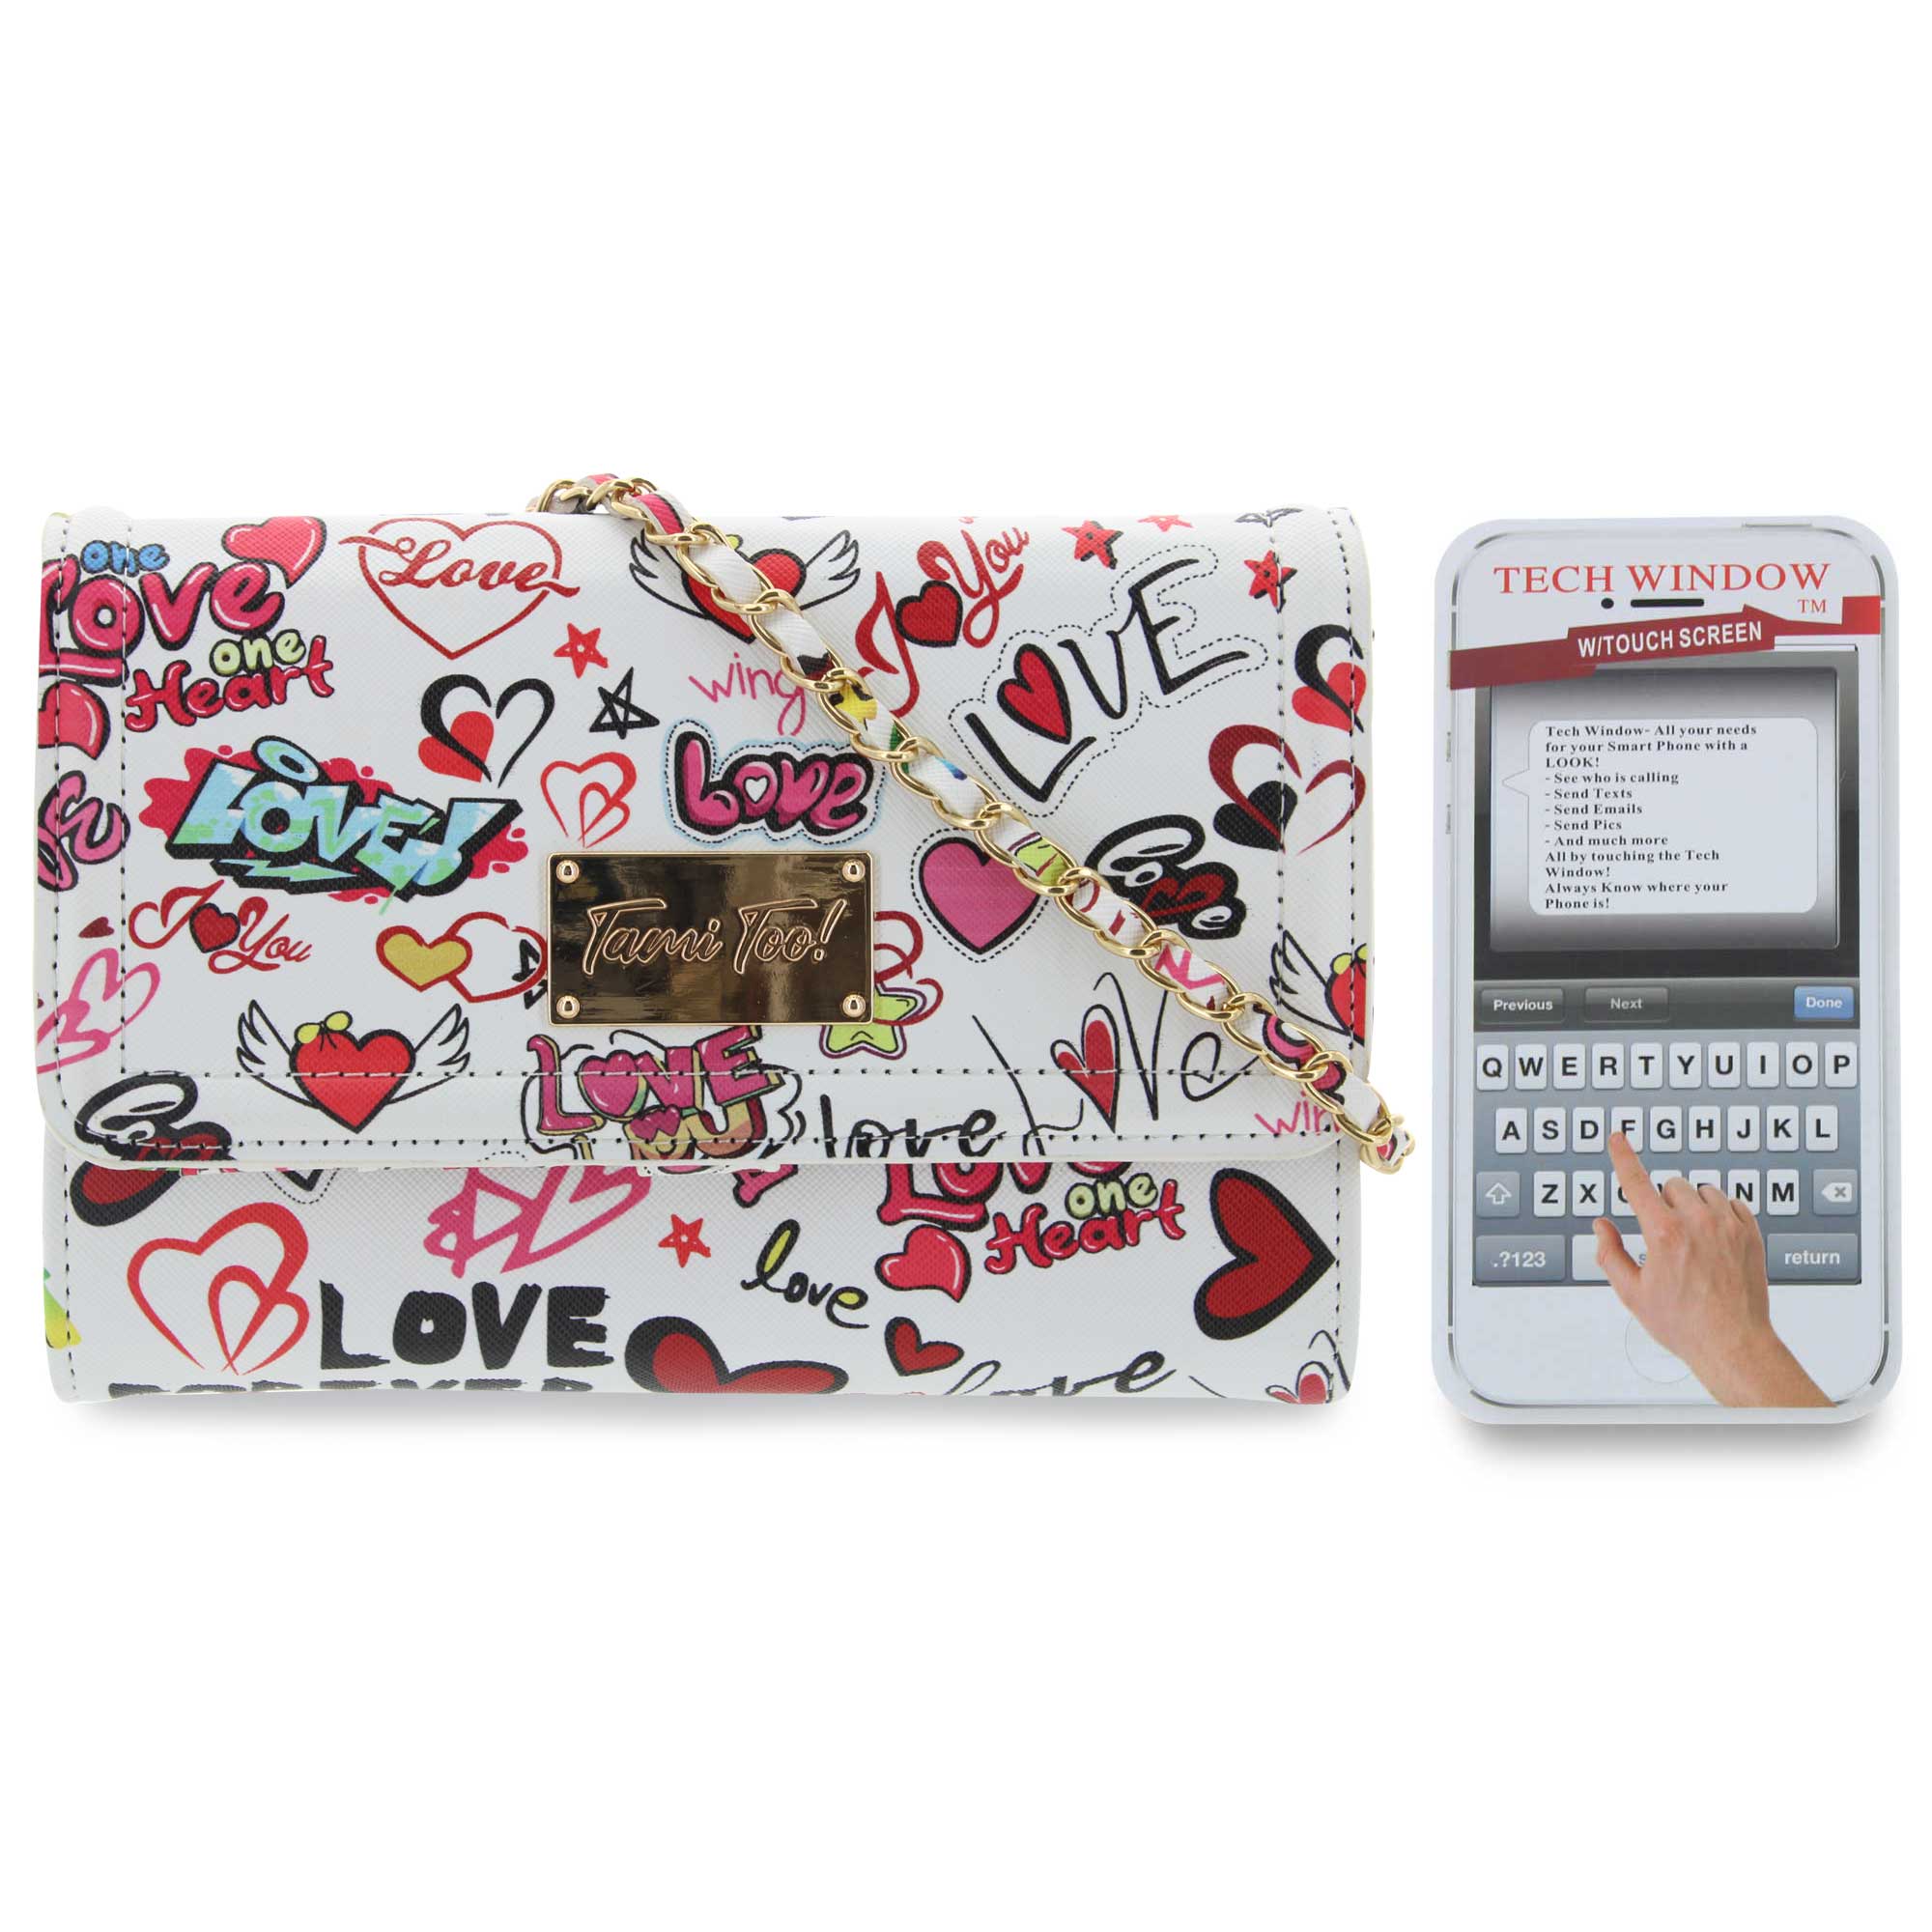 Tami Too Simpson Graffiti Wallet-On-A-String